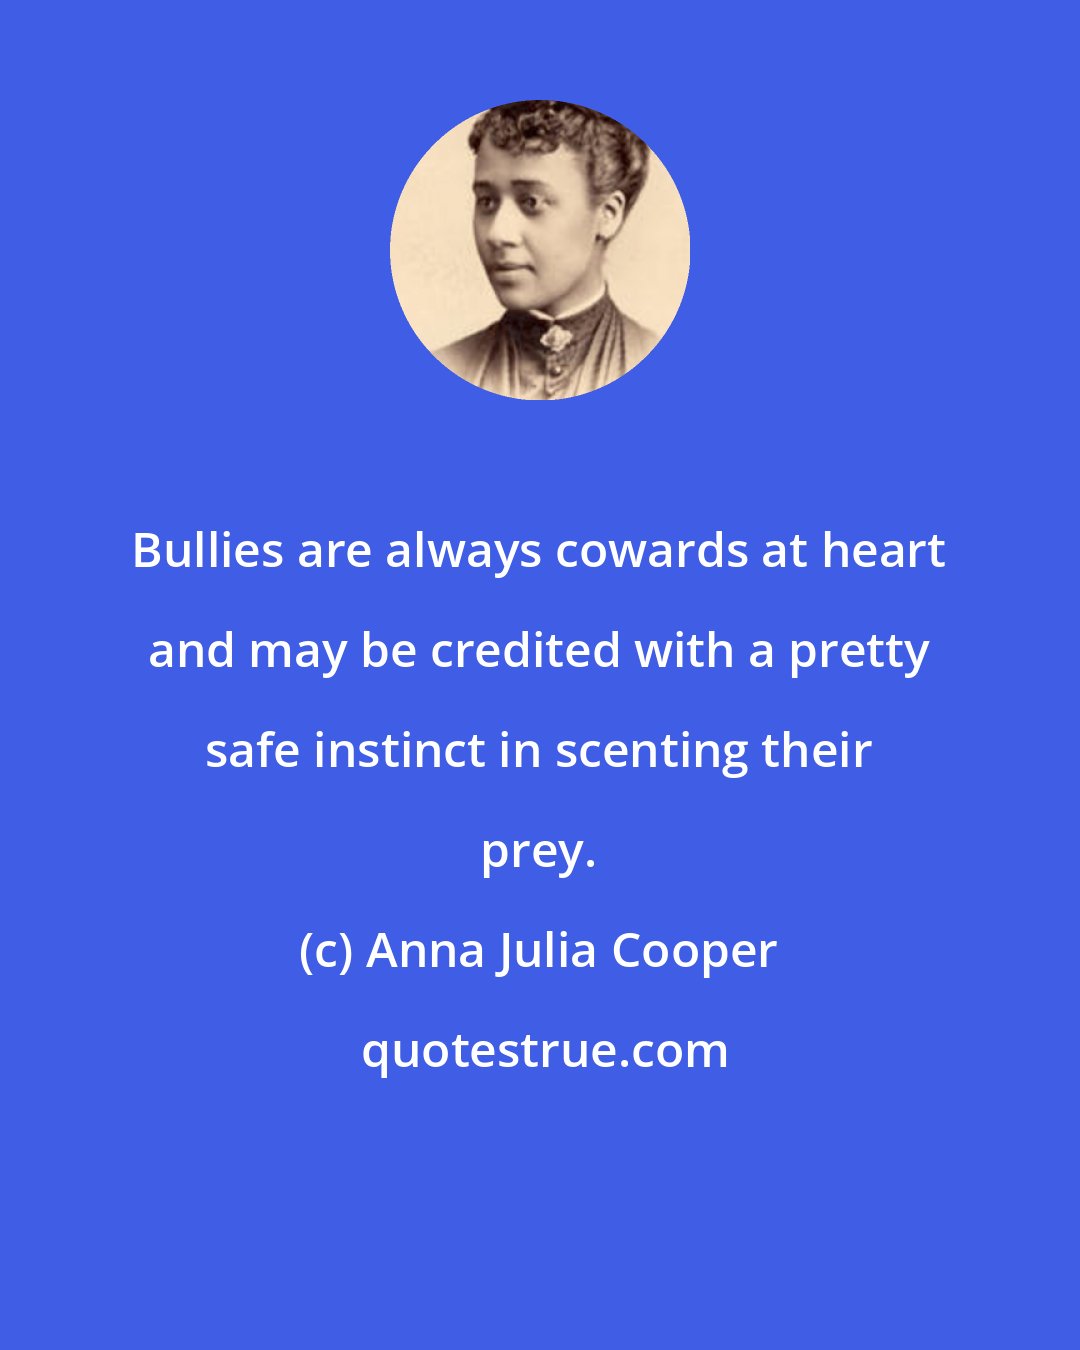 Anna Julia Cooper: Bullies are always cowards at heart and may be credited with a pretty safe instinct in scenting their prey.